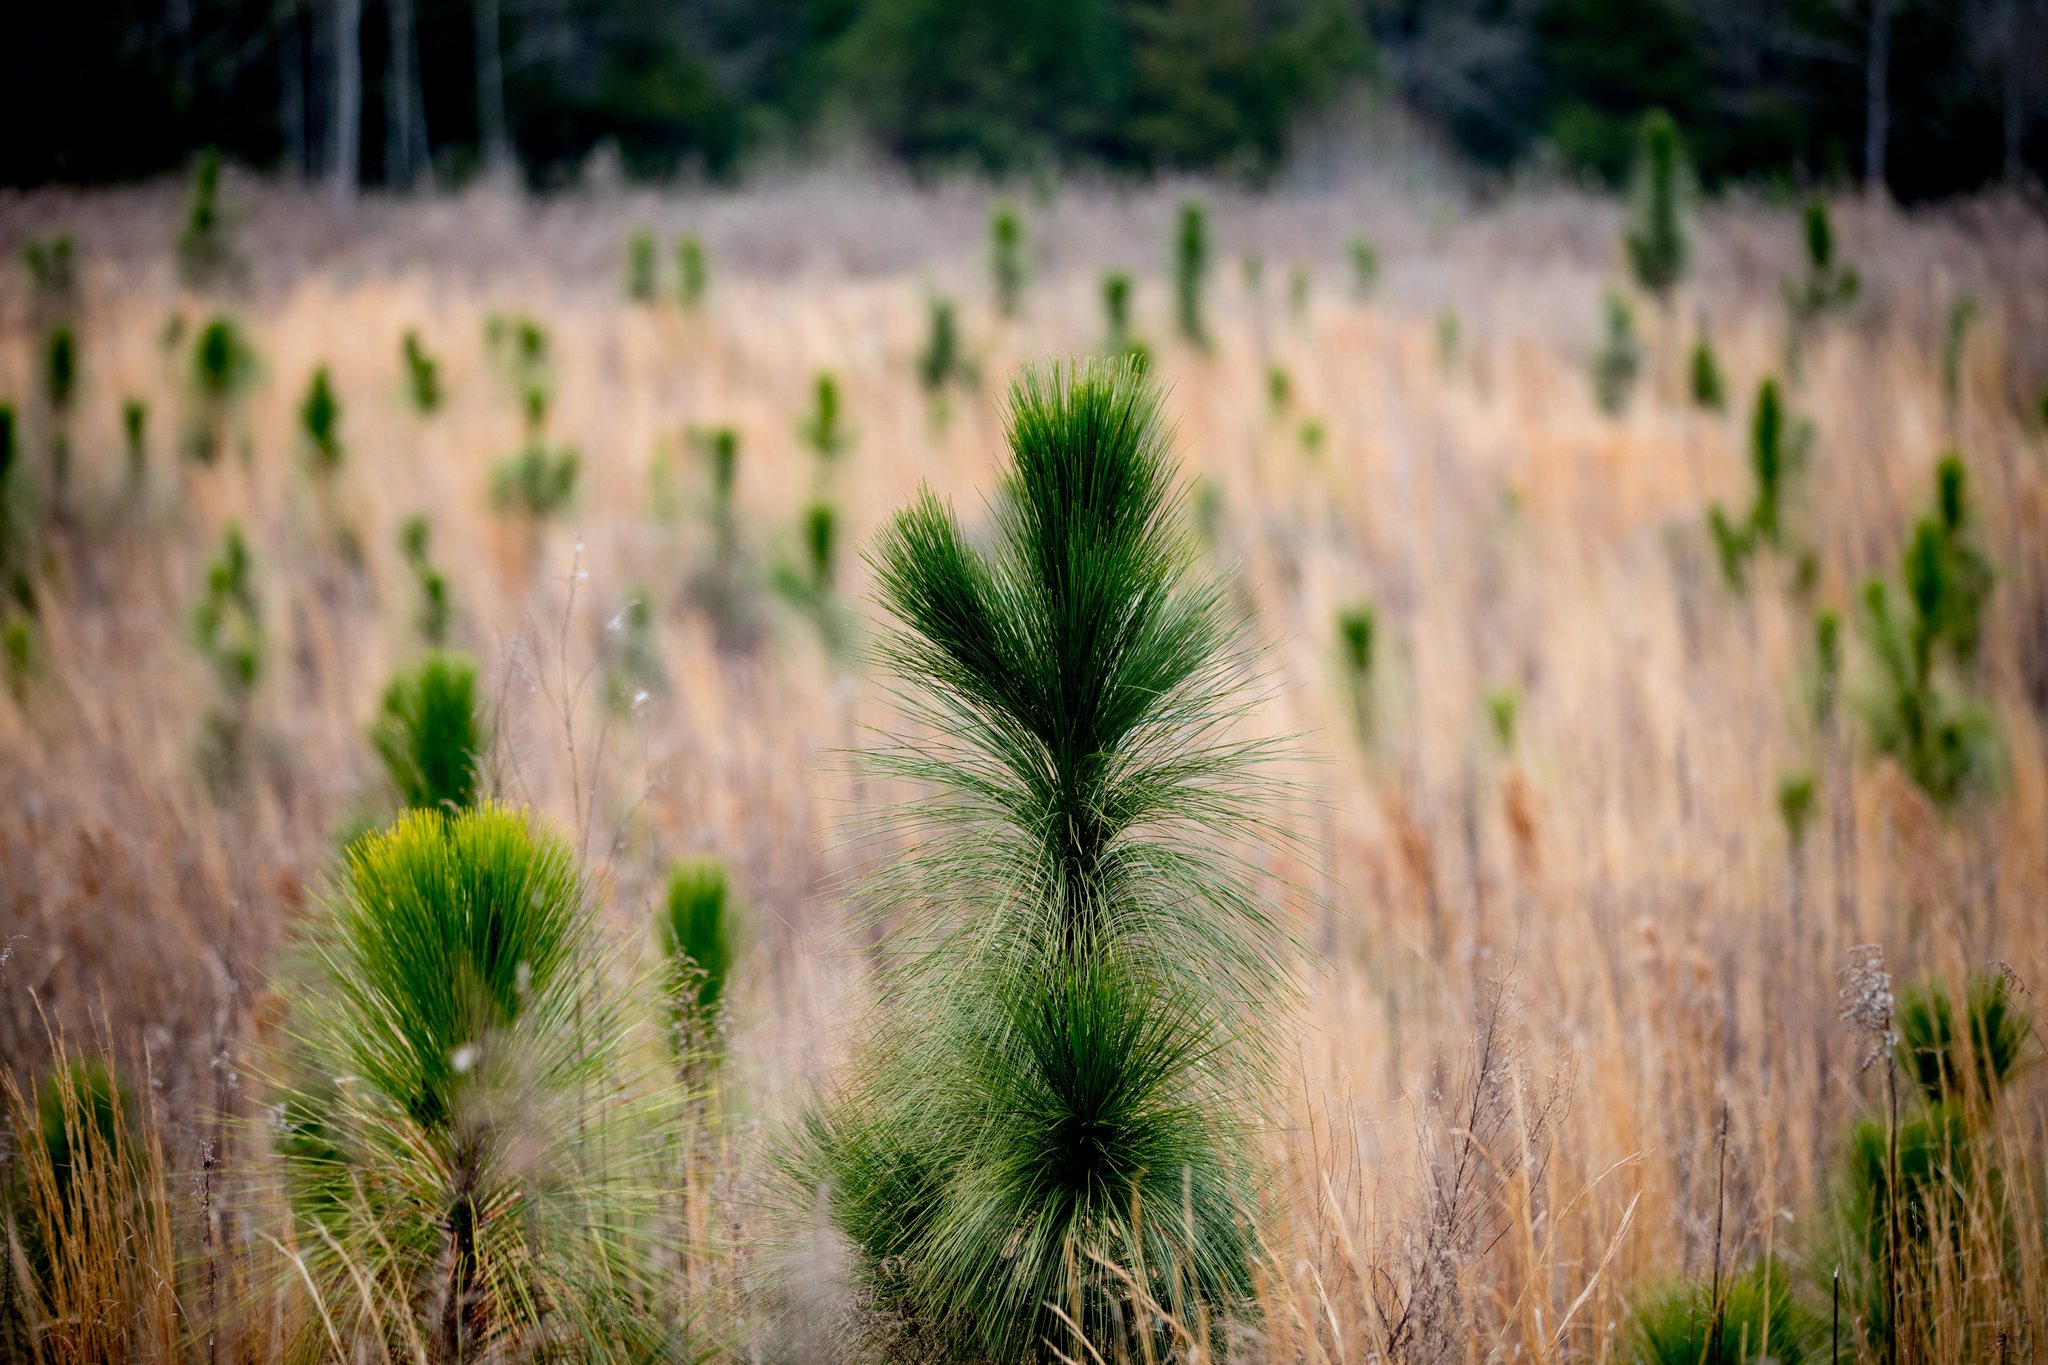 Greg Grant has planted longleaf pines, growing here in a field of goldenrod, on his land in Arcadia, Tex. In a few months he will use a controlled burn to stimulate native grasses and wildflowers while controlling hardwoods and shrubs that compete with the pine.